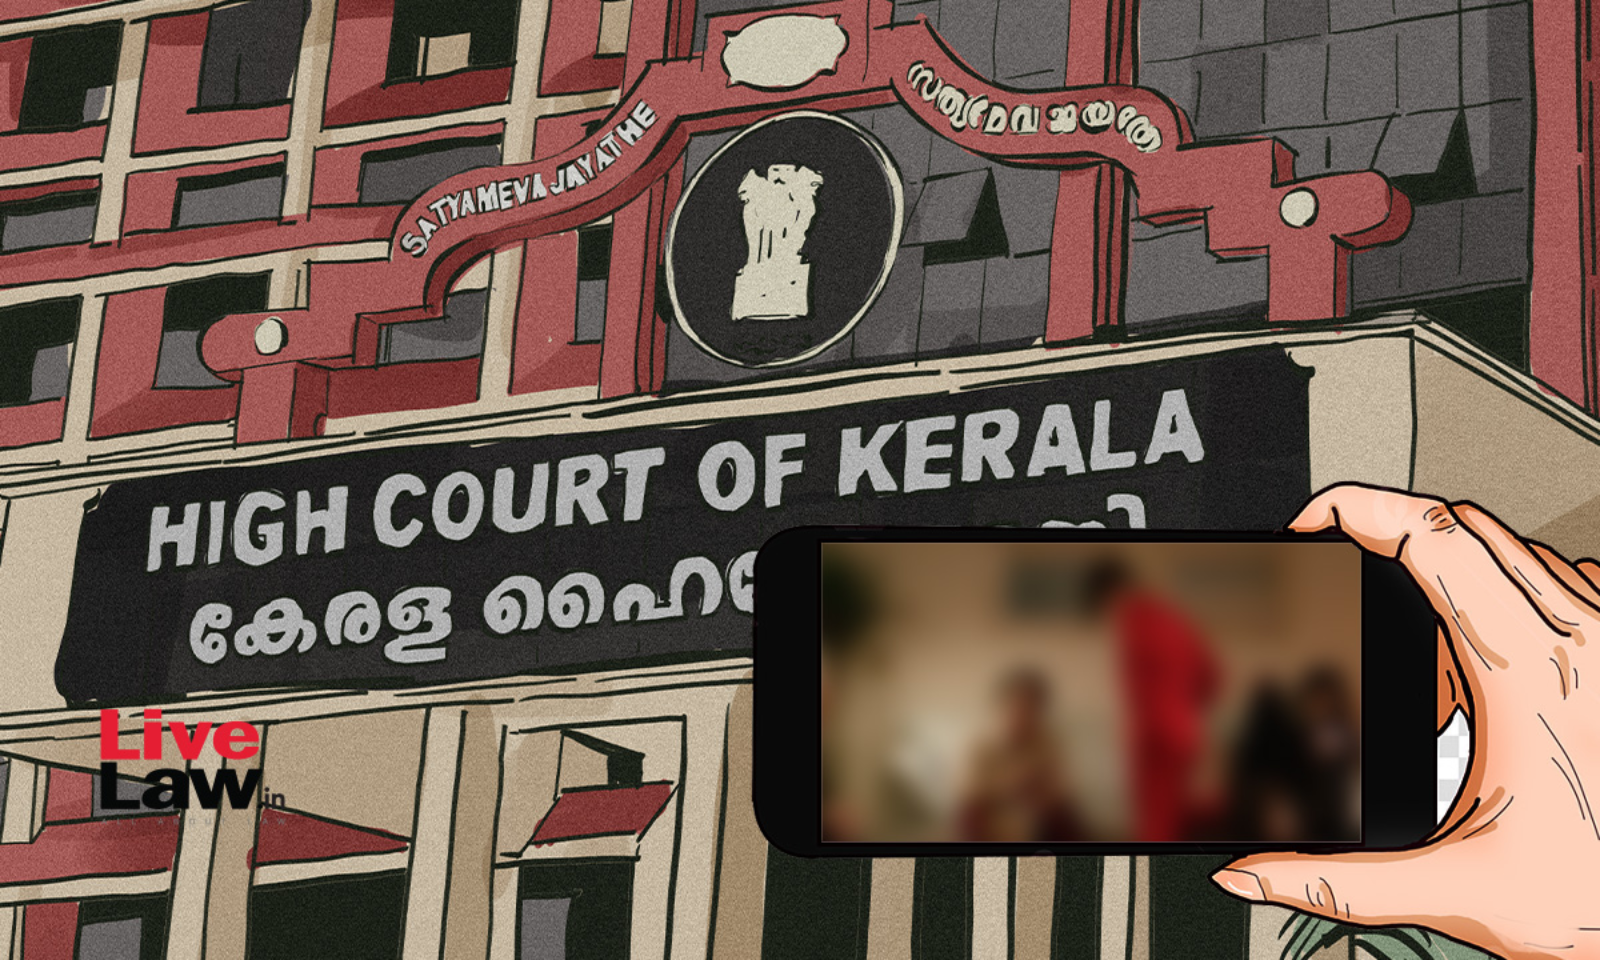 Porn X Of Kerala Police - Section 292 IPC | Private Viewing of Porn videos Without Sharing | Not an  Obscenity Offense